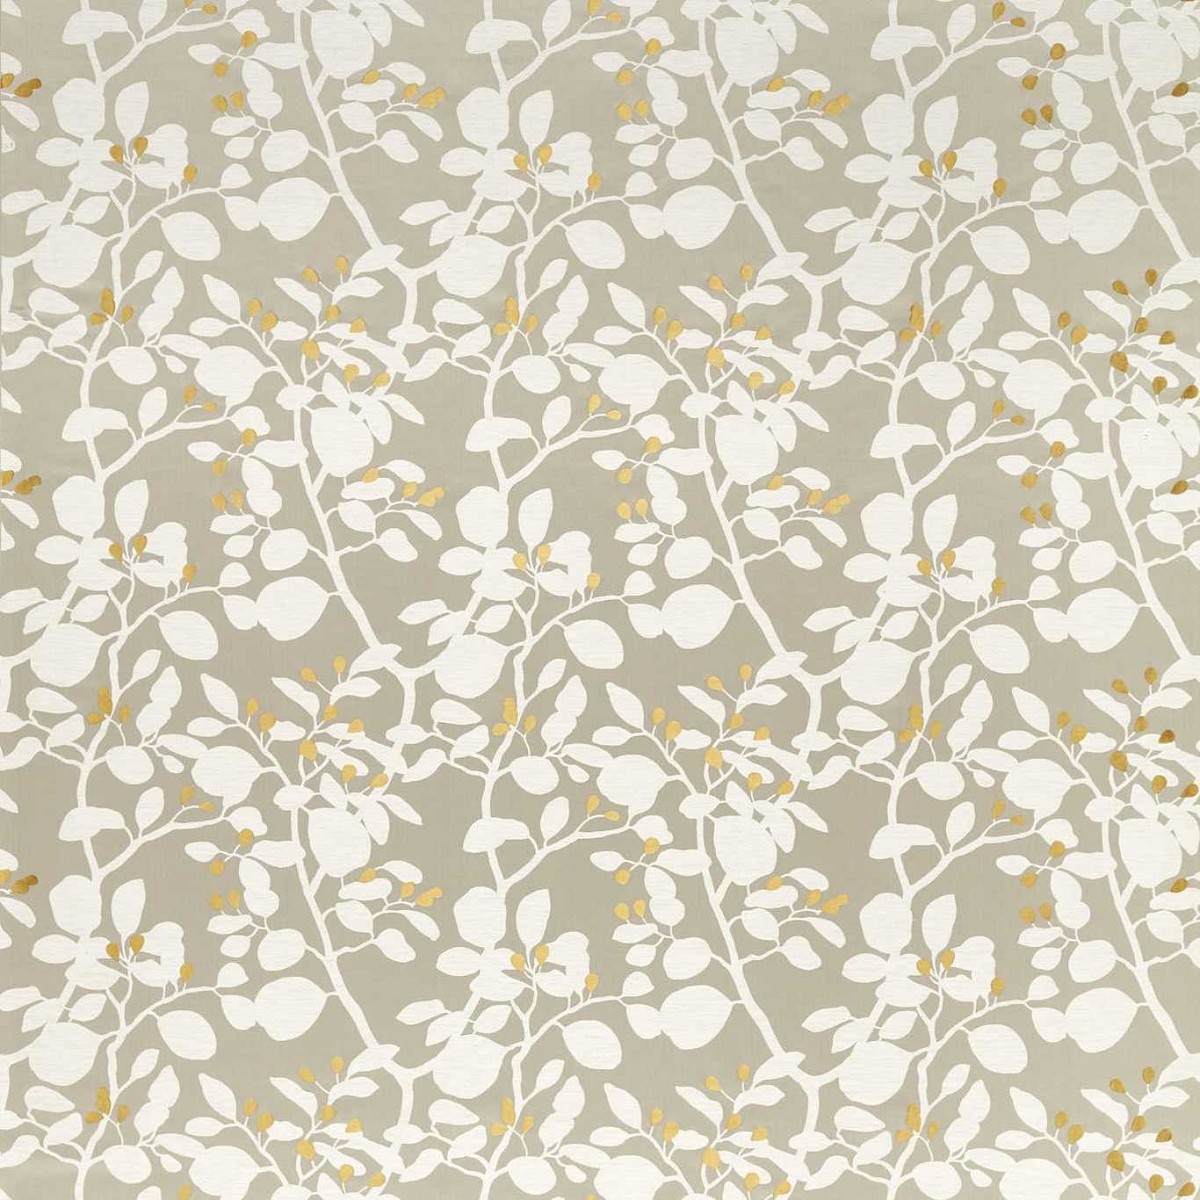 Ardisia Diffused Light Fabric by Harlequin